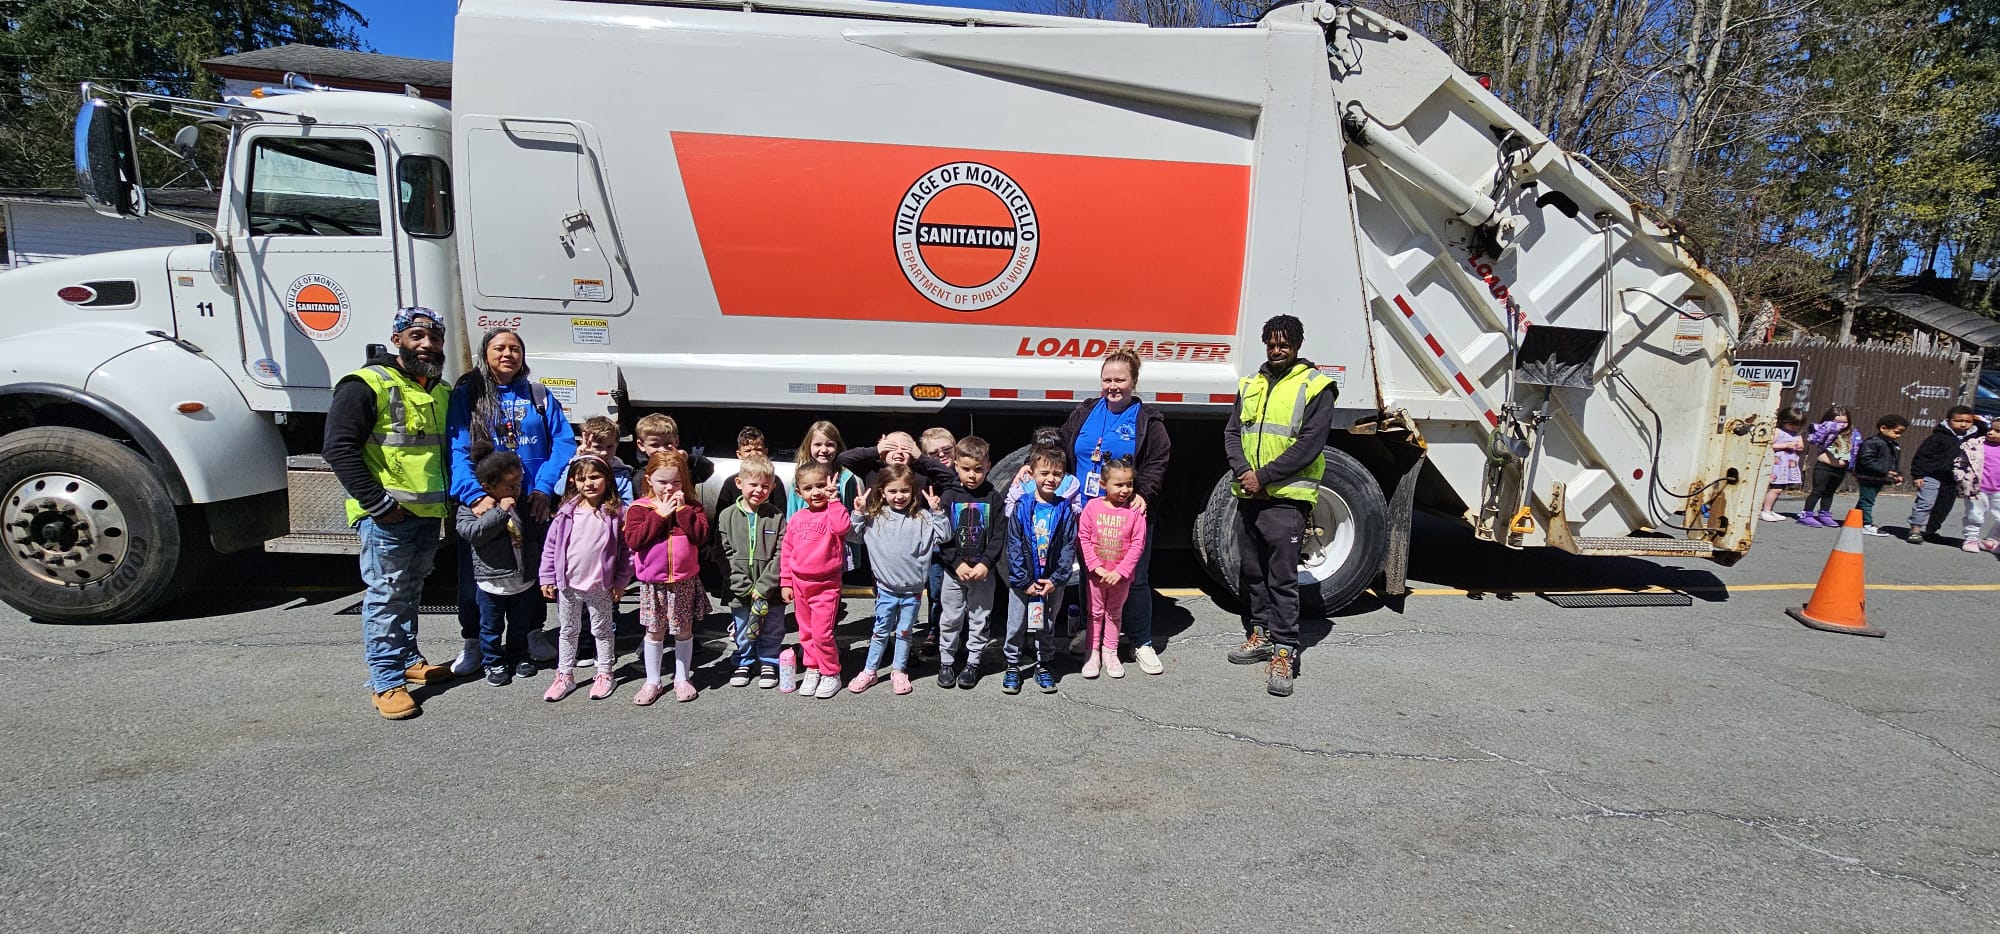 Two sanitation workers pose with preschoolers and their truck 